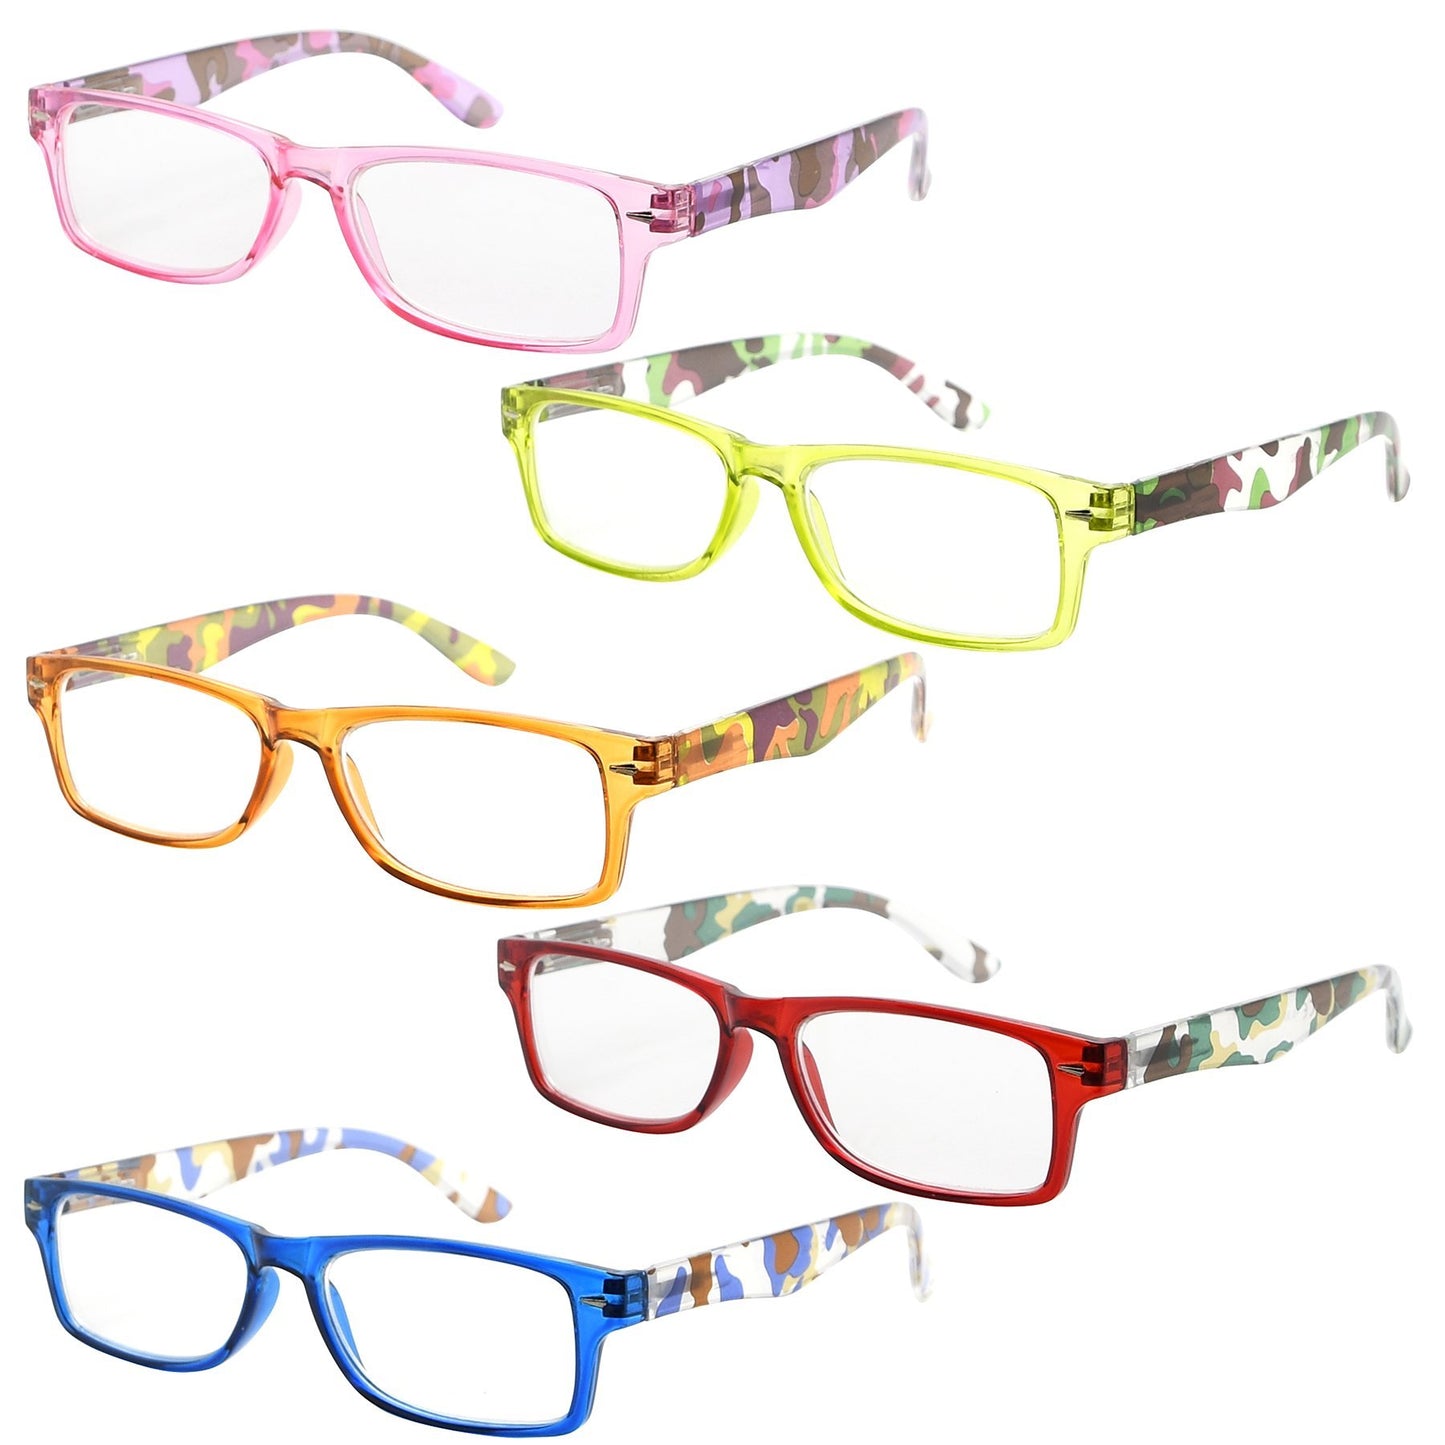 5 Pack Cute Reading Glasses with Camouflage Temples R066C